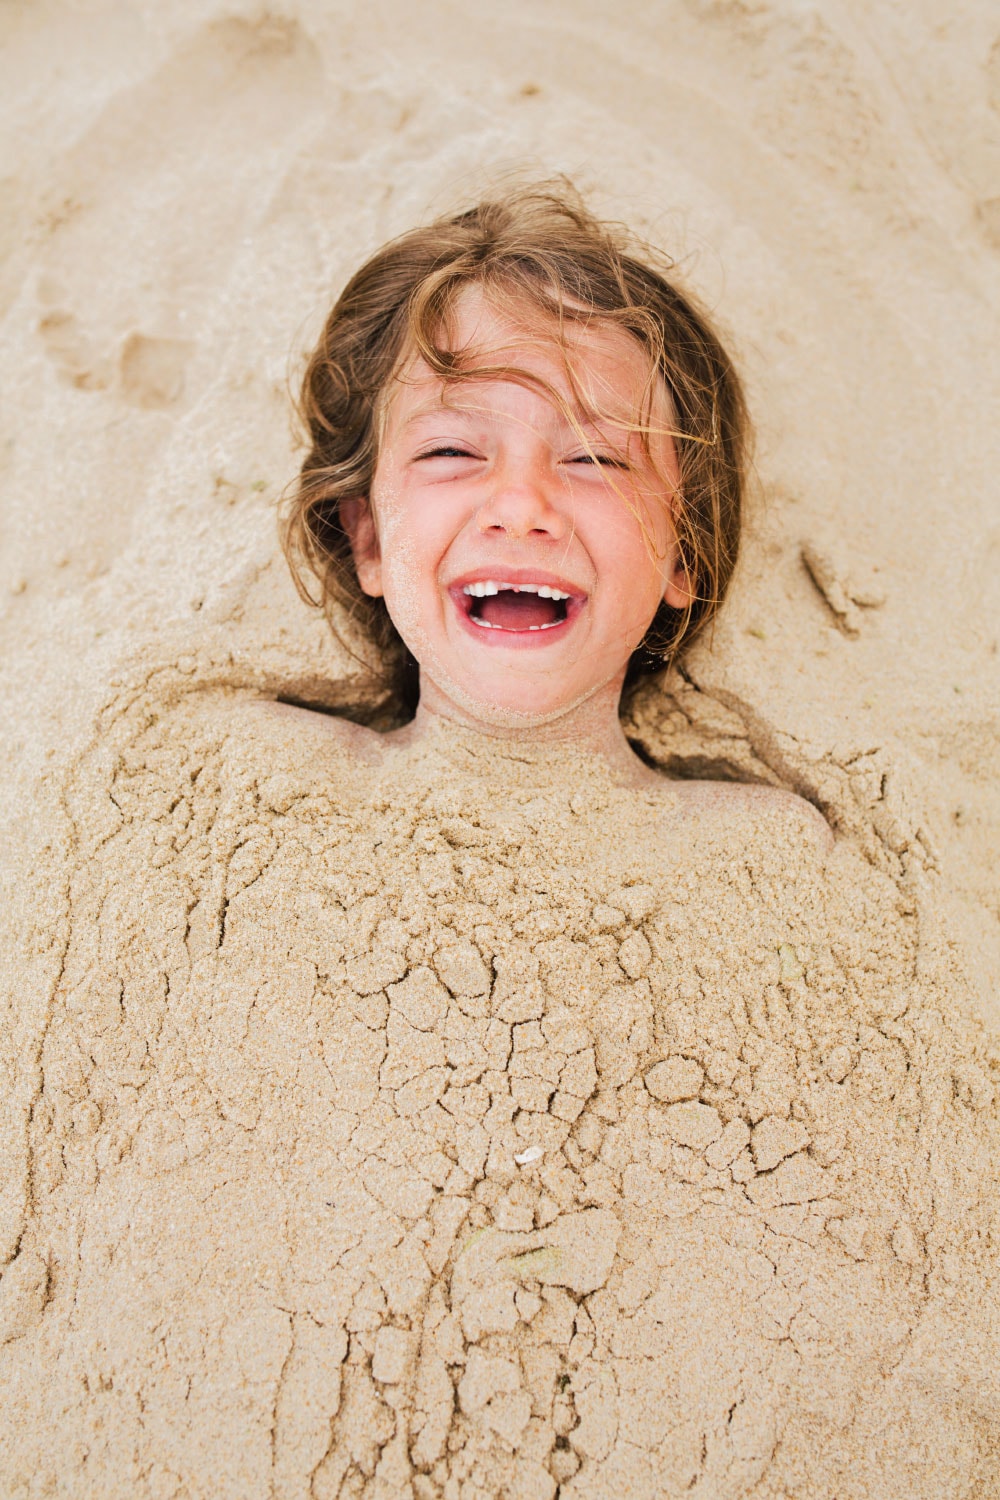 Copy space and a child lying buried in the sand just for fun and enjoyment on the beach